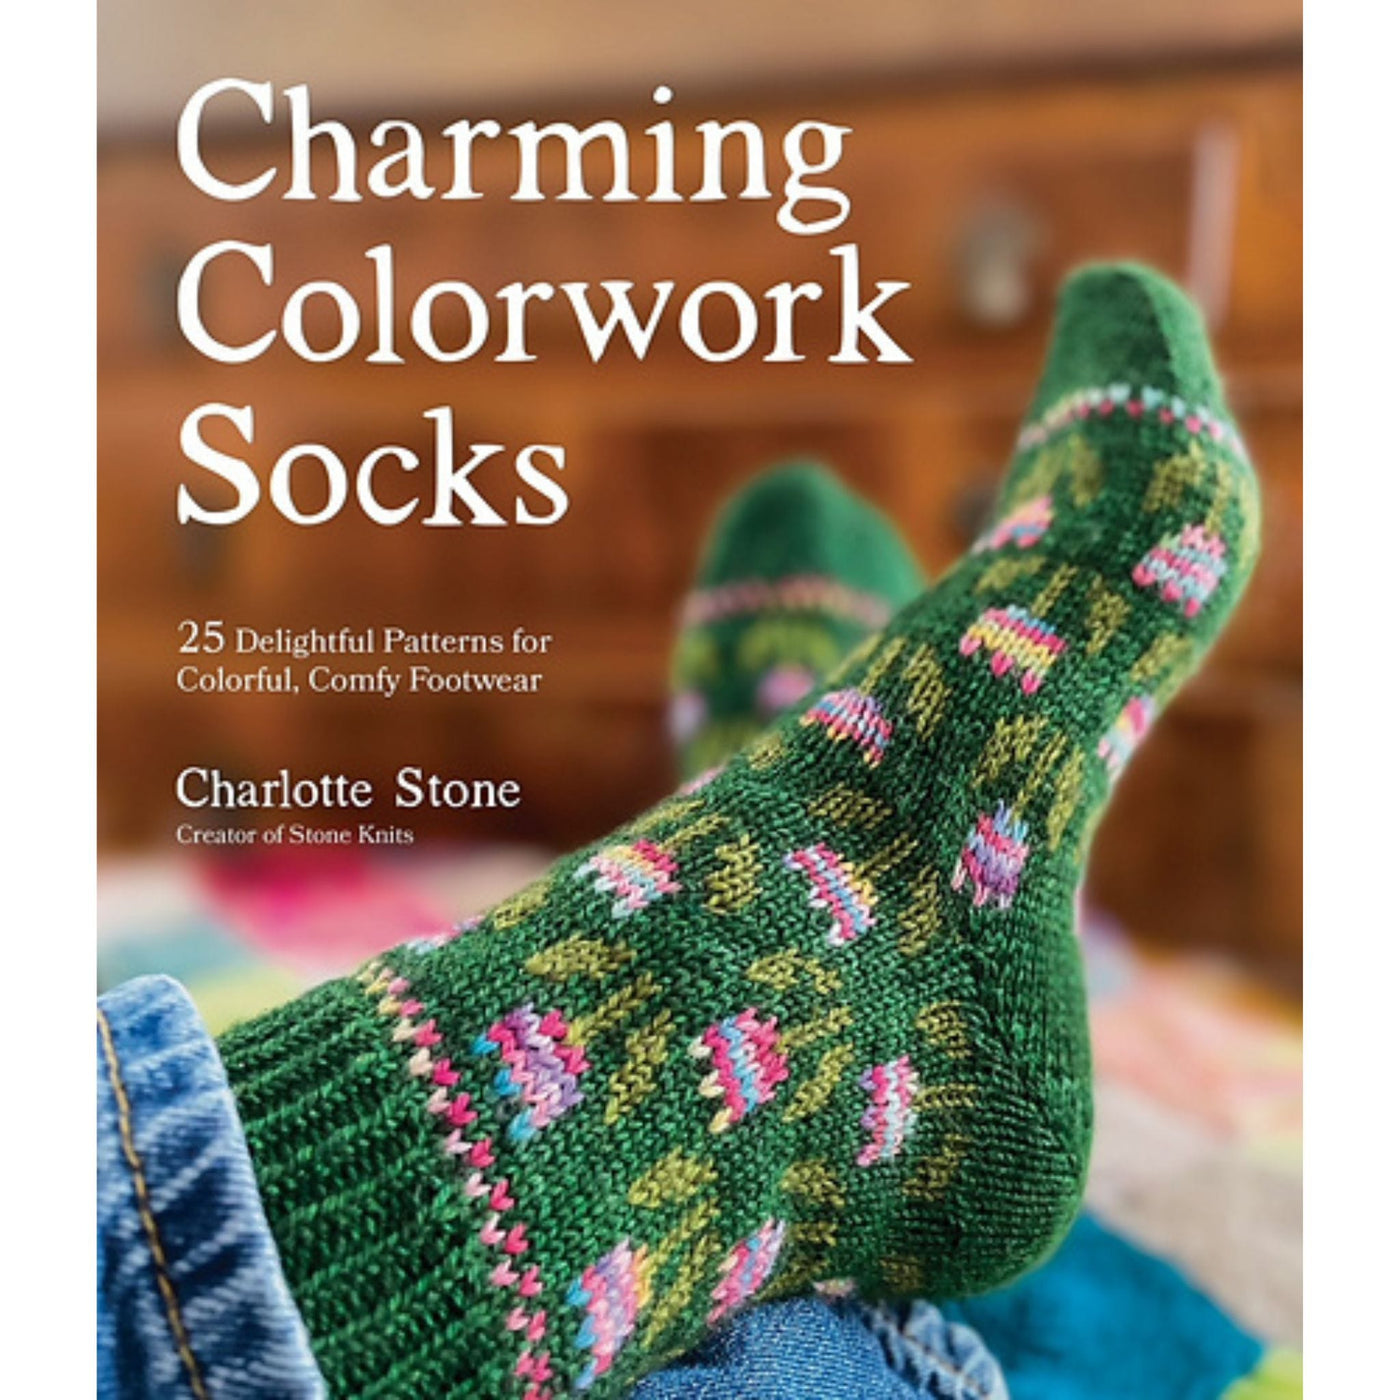 Cover image for Charming Colorwork Socks by Charlotte Stone, with feet wearing green socks with a multicolor tulip pattern